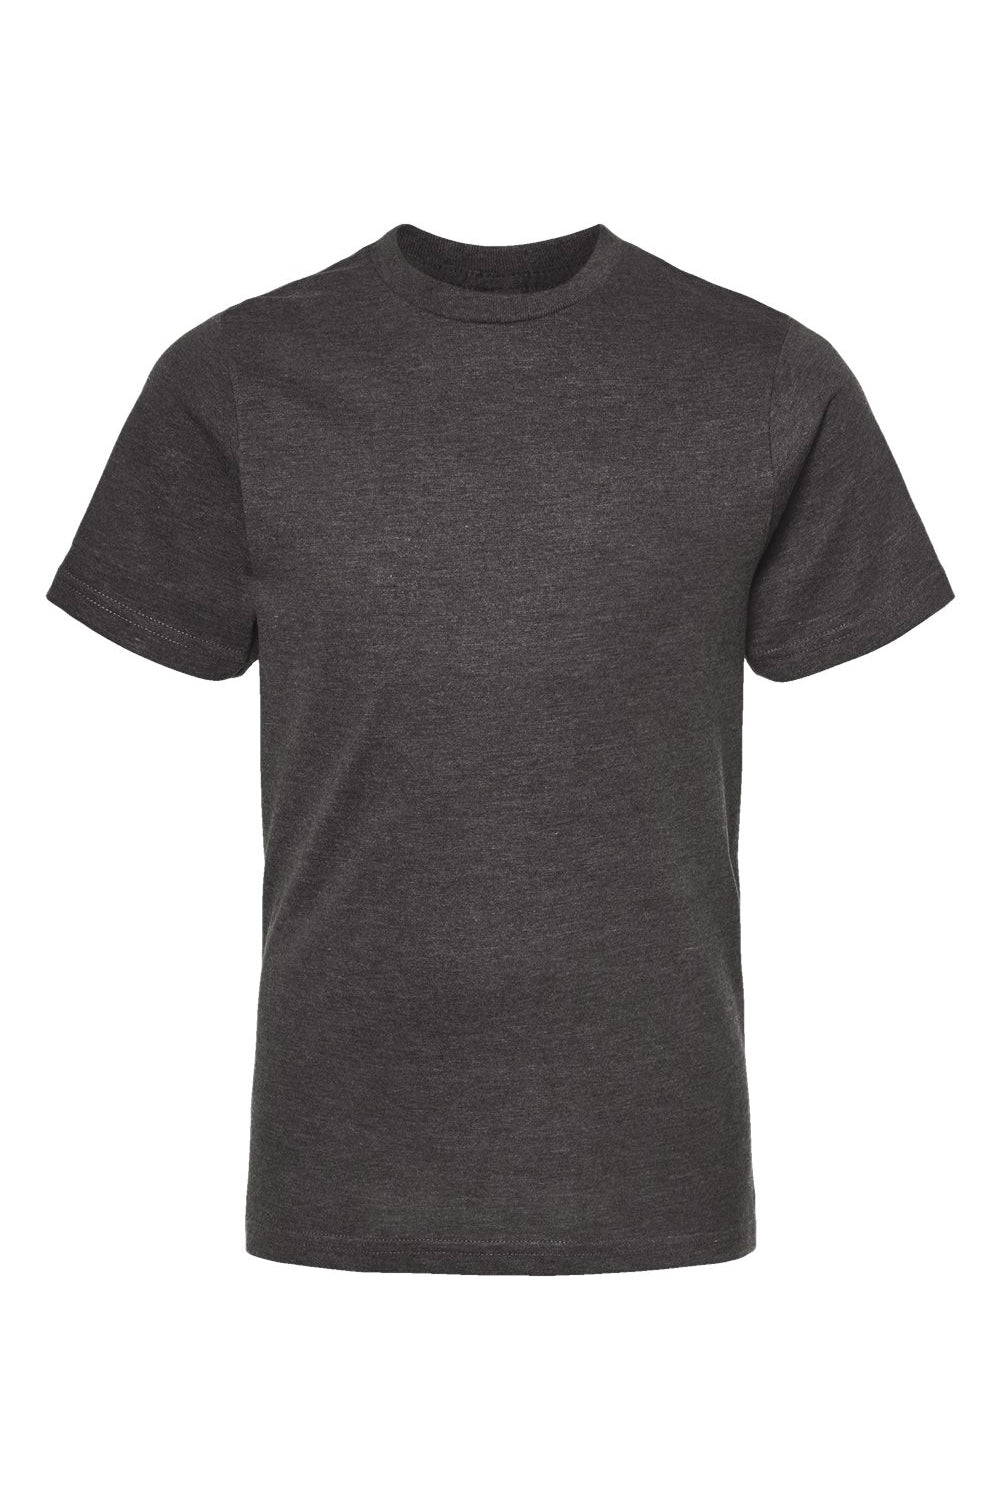 Tultex 295 Youth Jersey Short Sleeve Crewneck T-Shirt Heather Charcoal Grey Flat Front